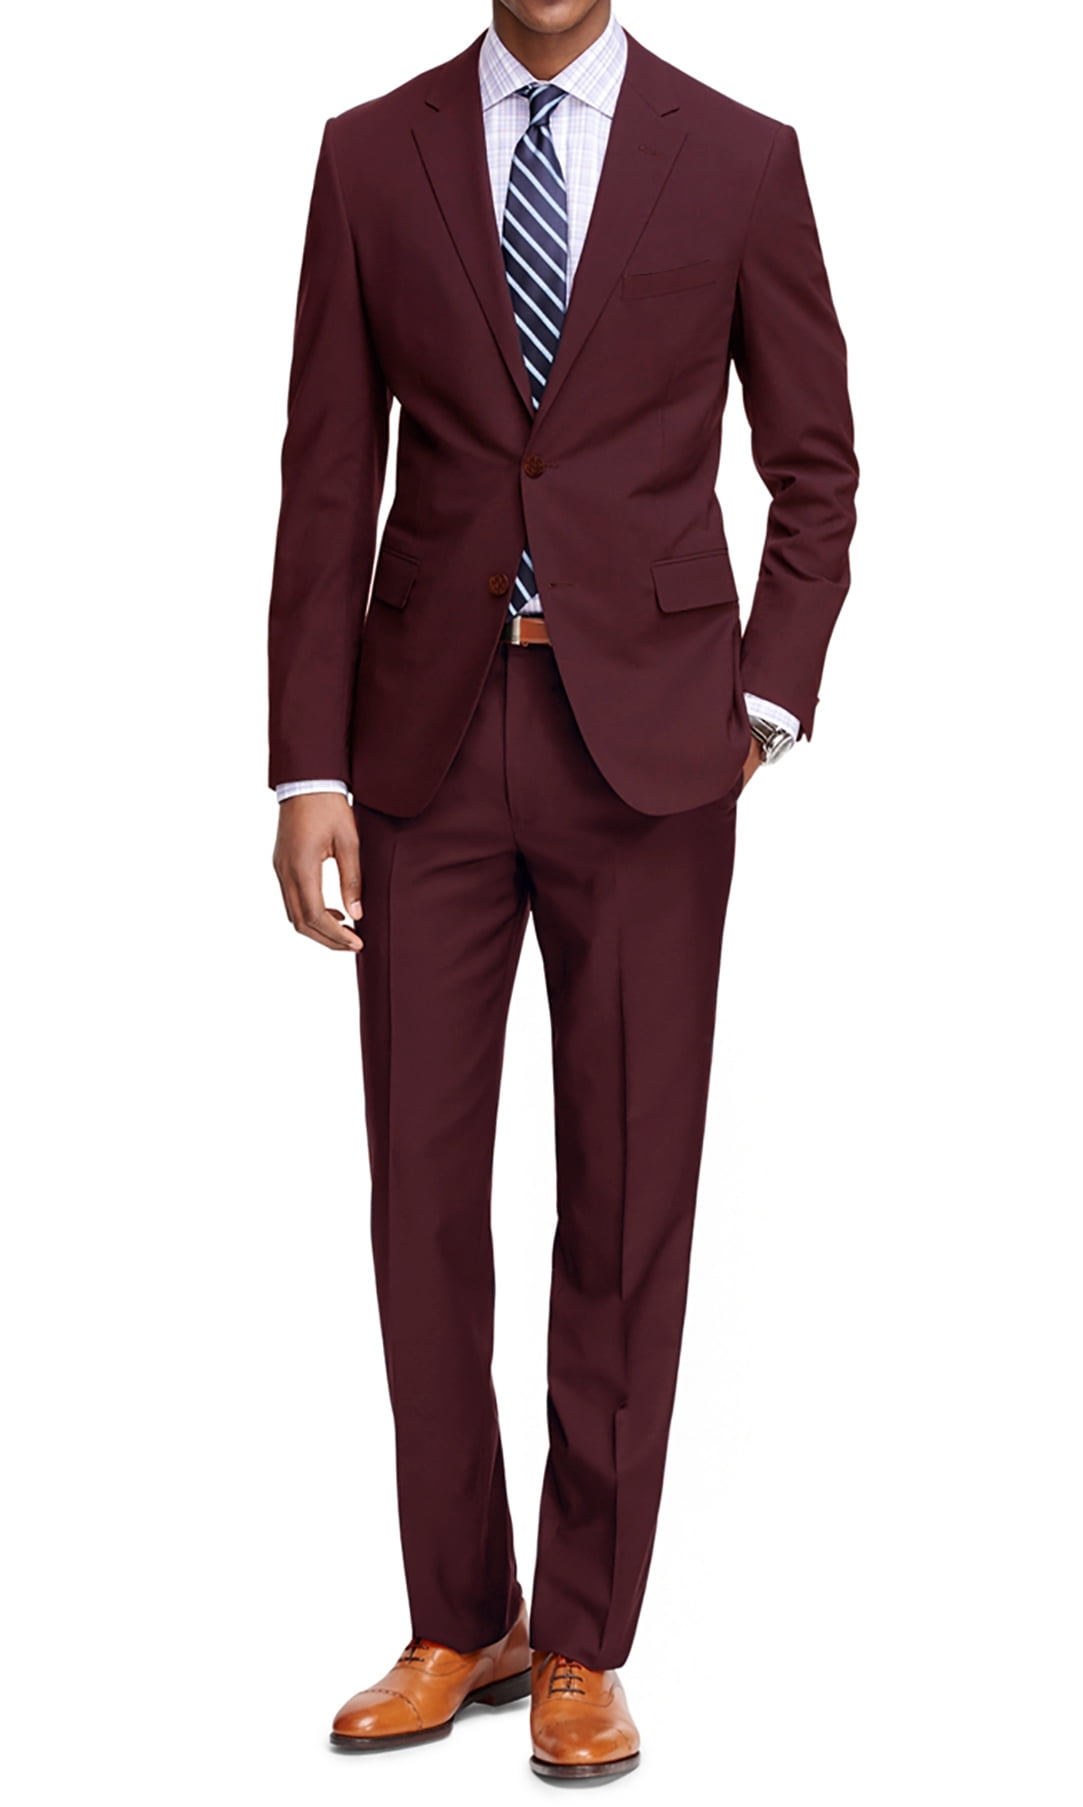 YOUTHUP Mens Suit Slim Fit 2 Piece Formal Blazer & Trousers Several Colors Available